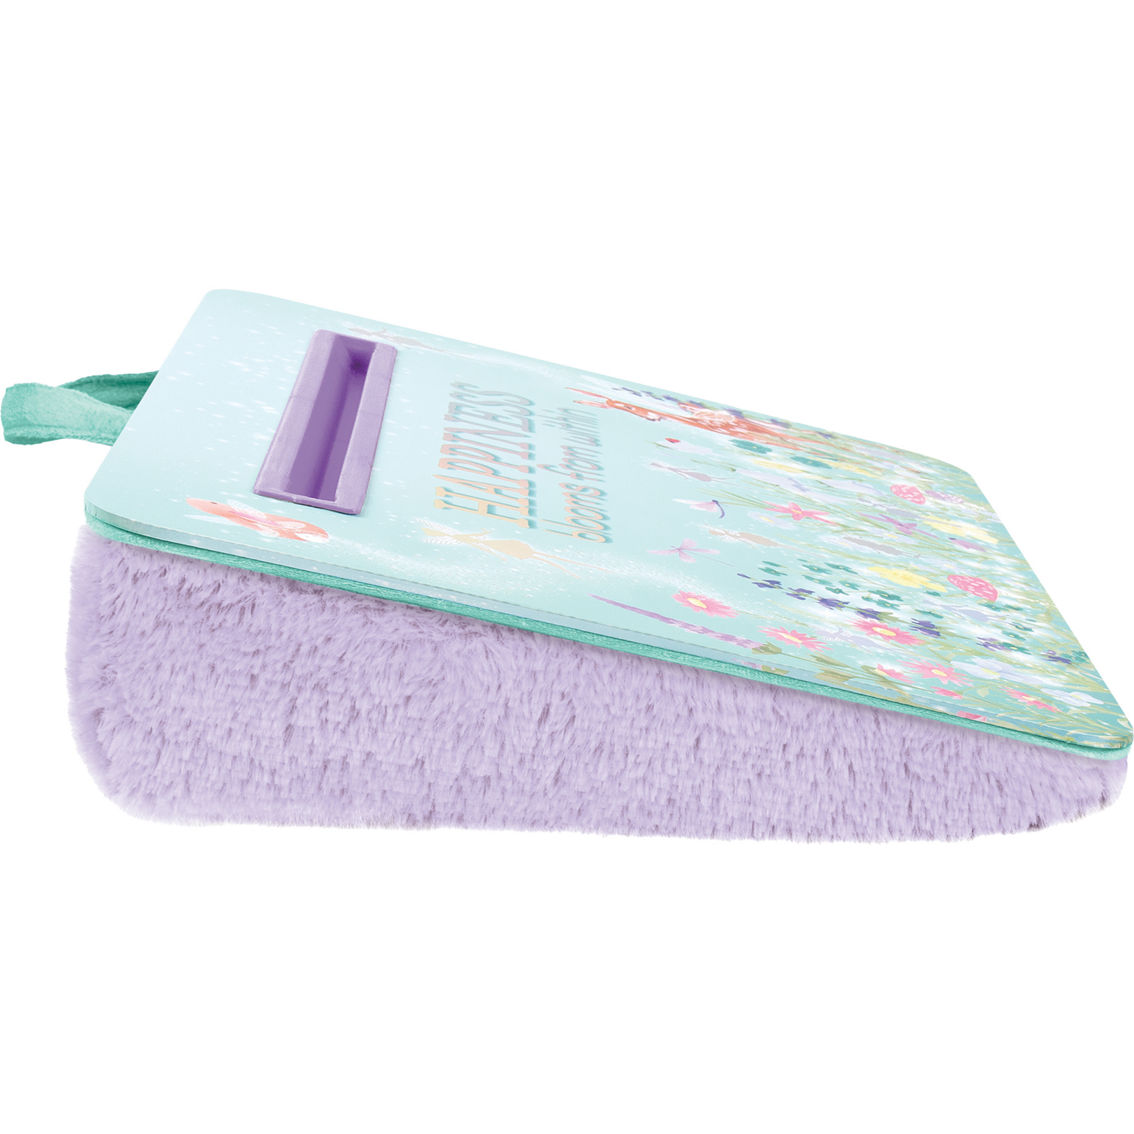 Make It Real Three Cheers for Girls Fairy Garden Lap Desk - Image 3 of 6